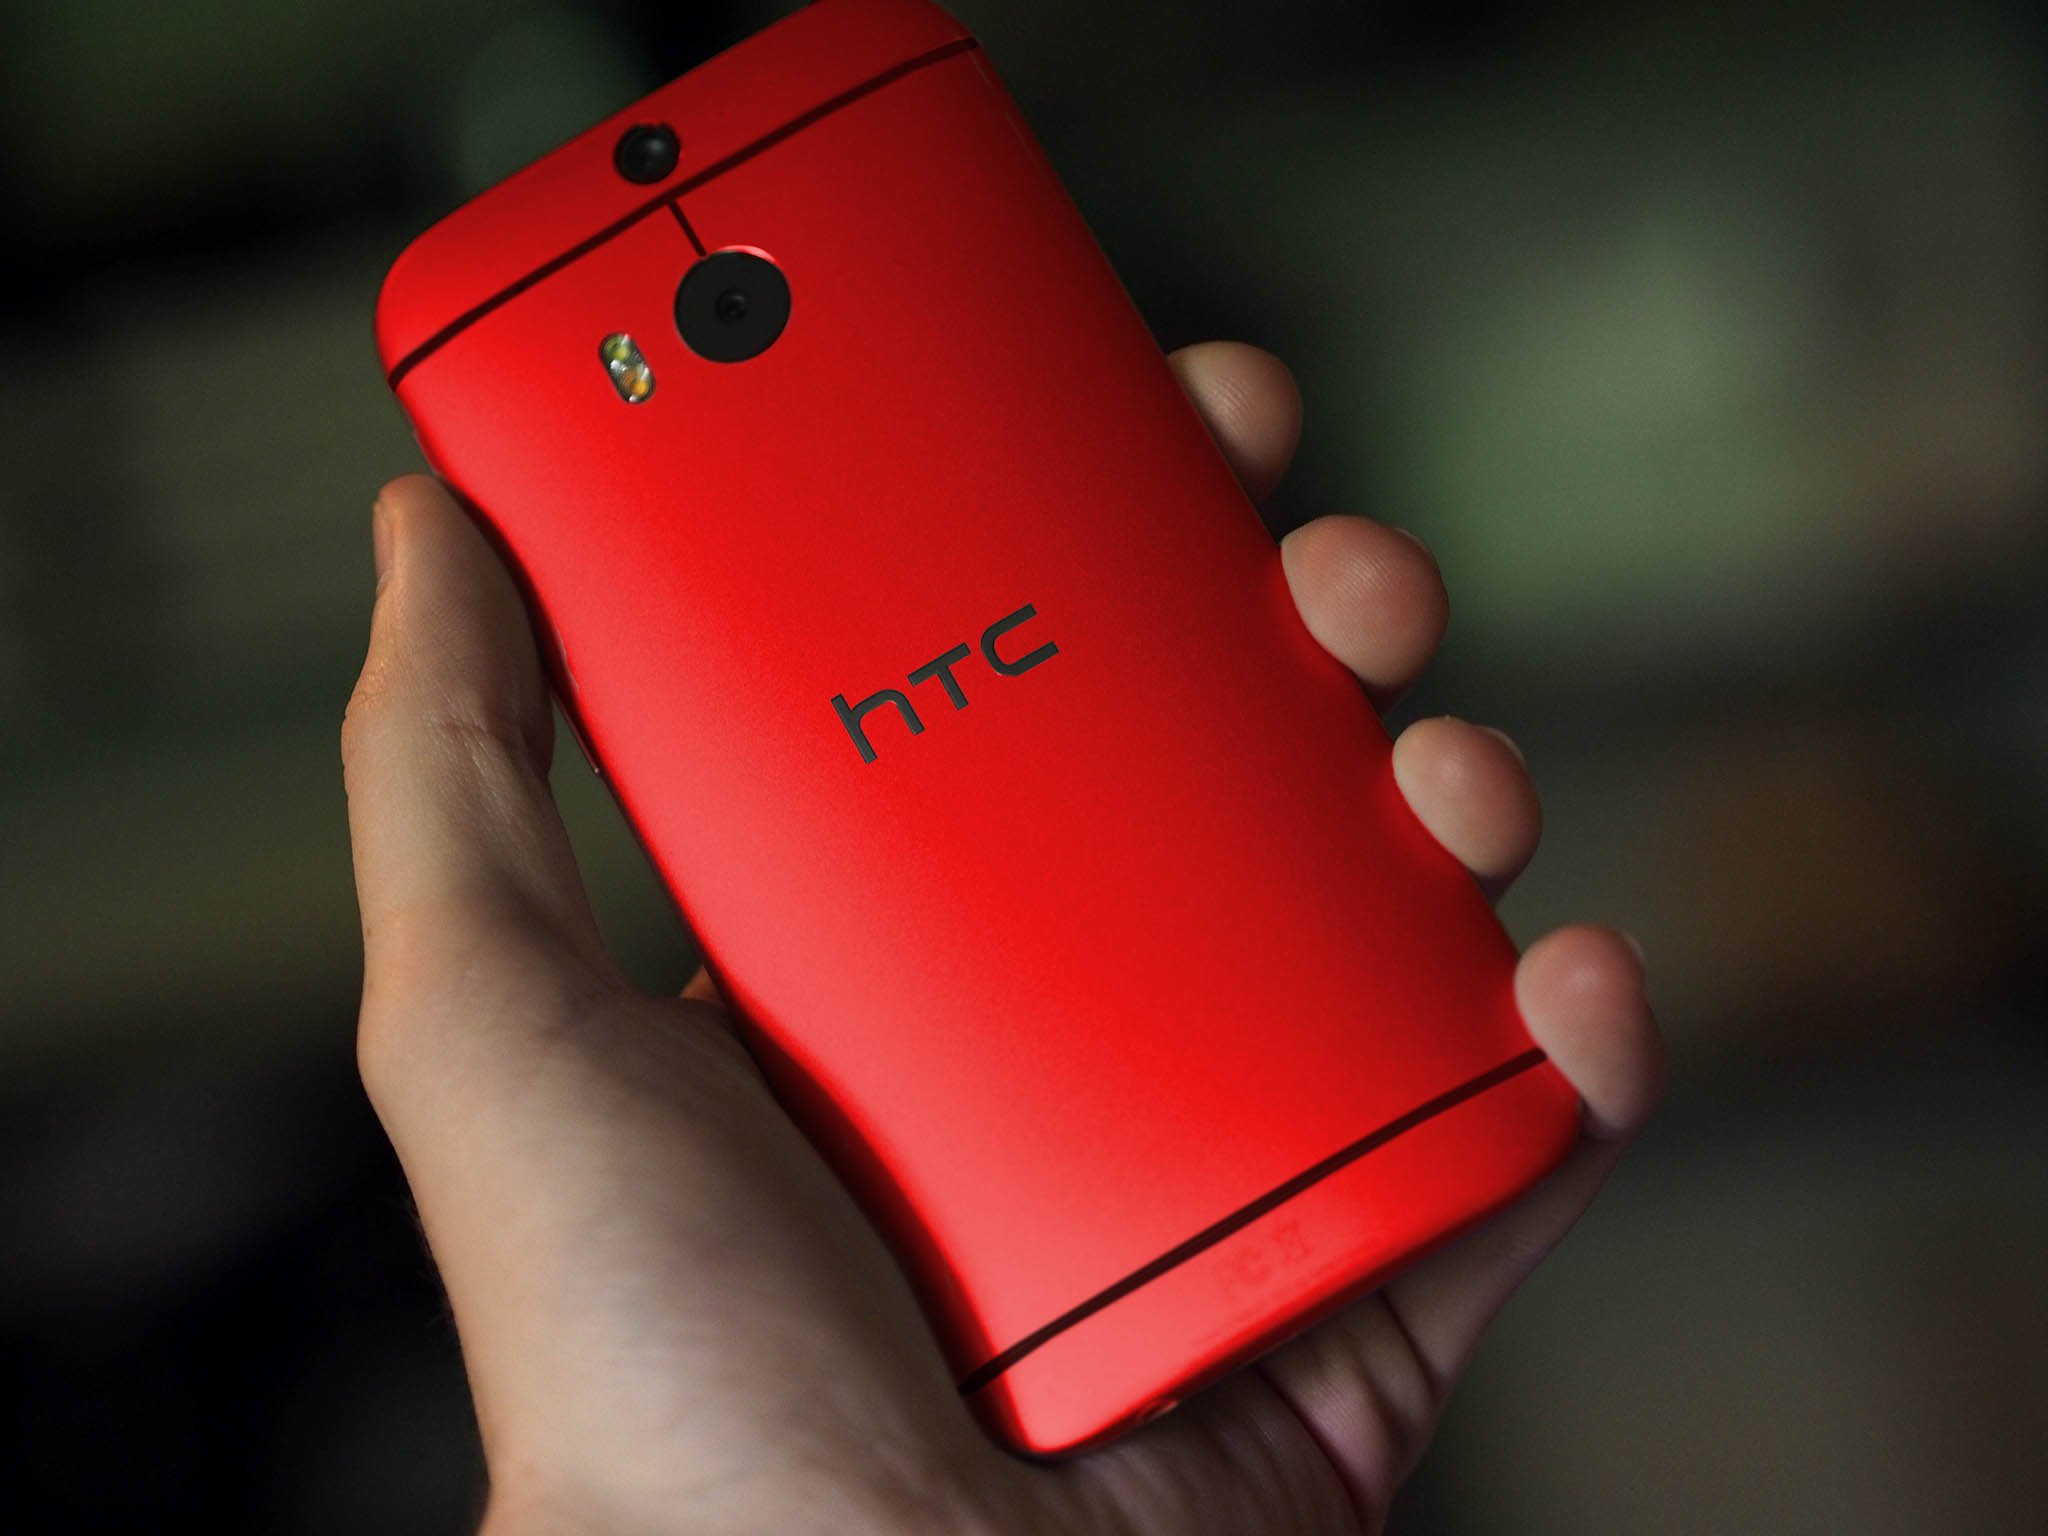 HTC confirms HTC One M8, M7 will get Android Lollipop update in 90 days